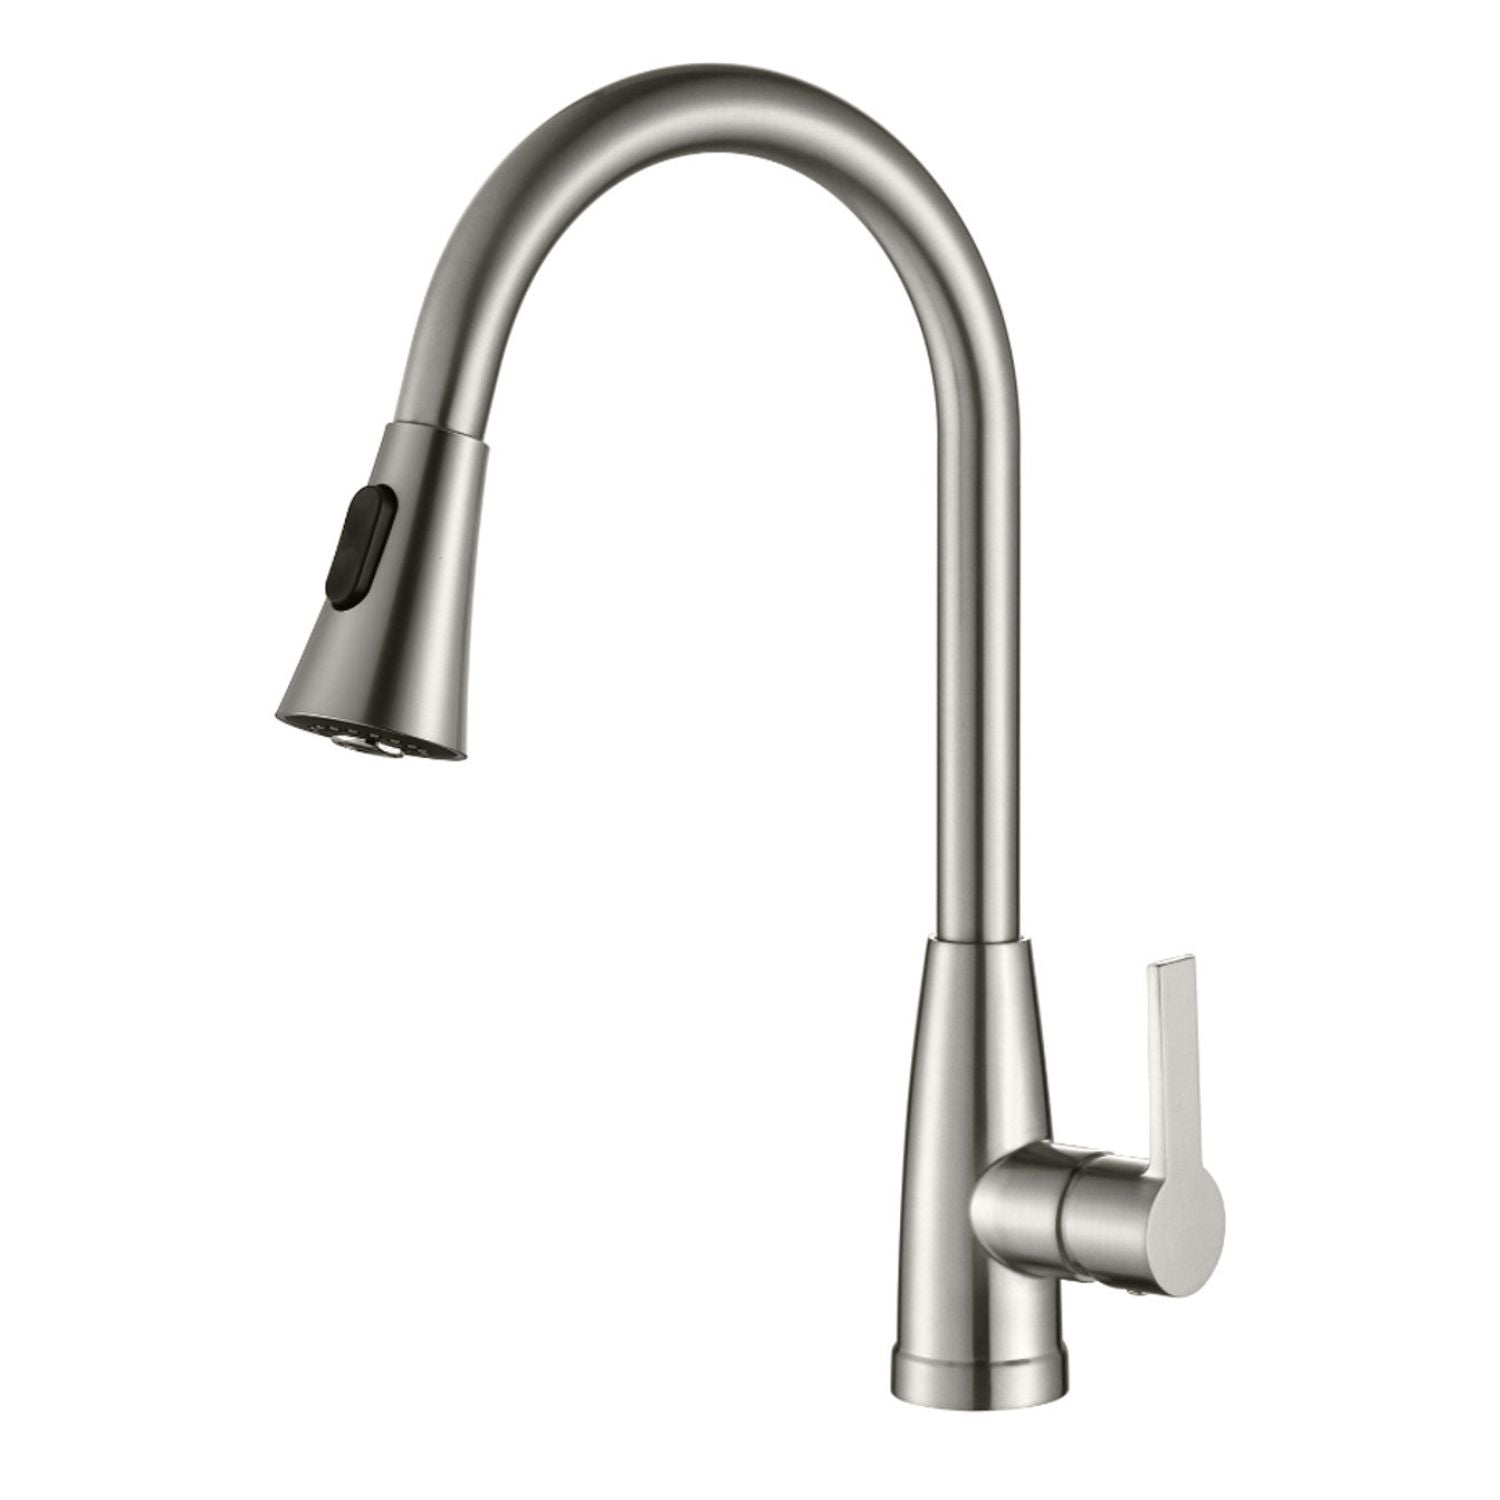 Duko Stainless Steel Kitchen Single Handle Faucet in Brushed Nickel Finish